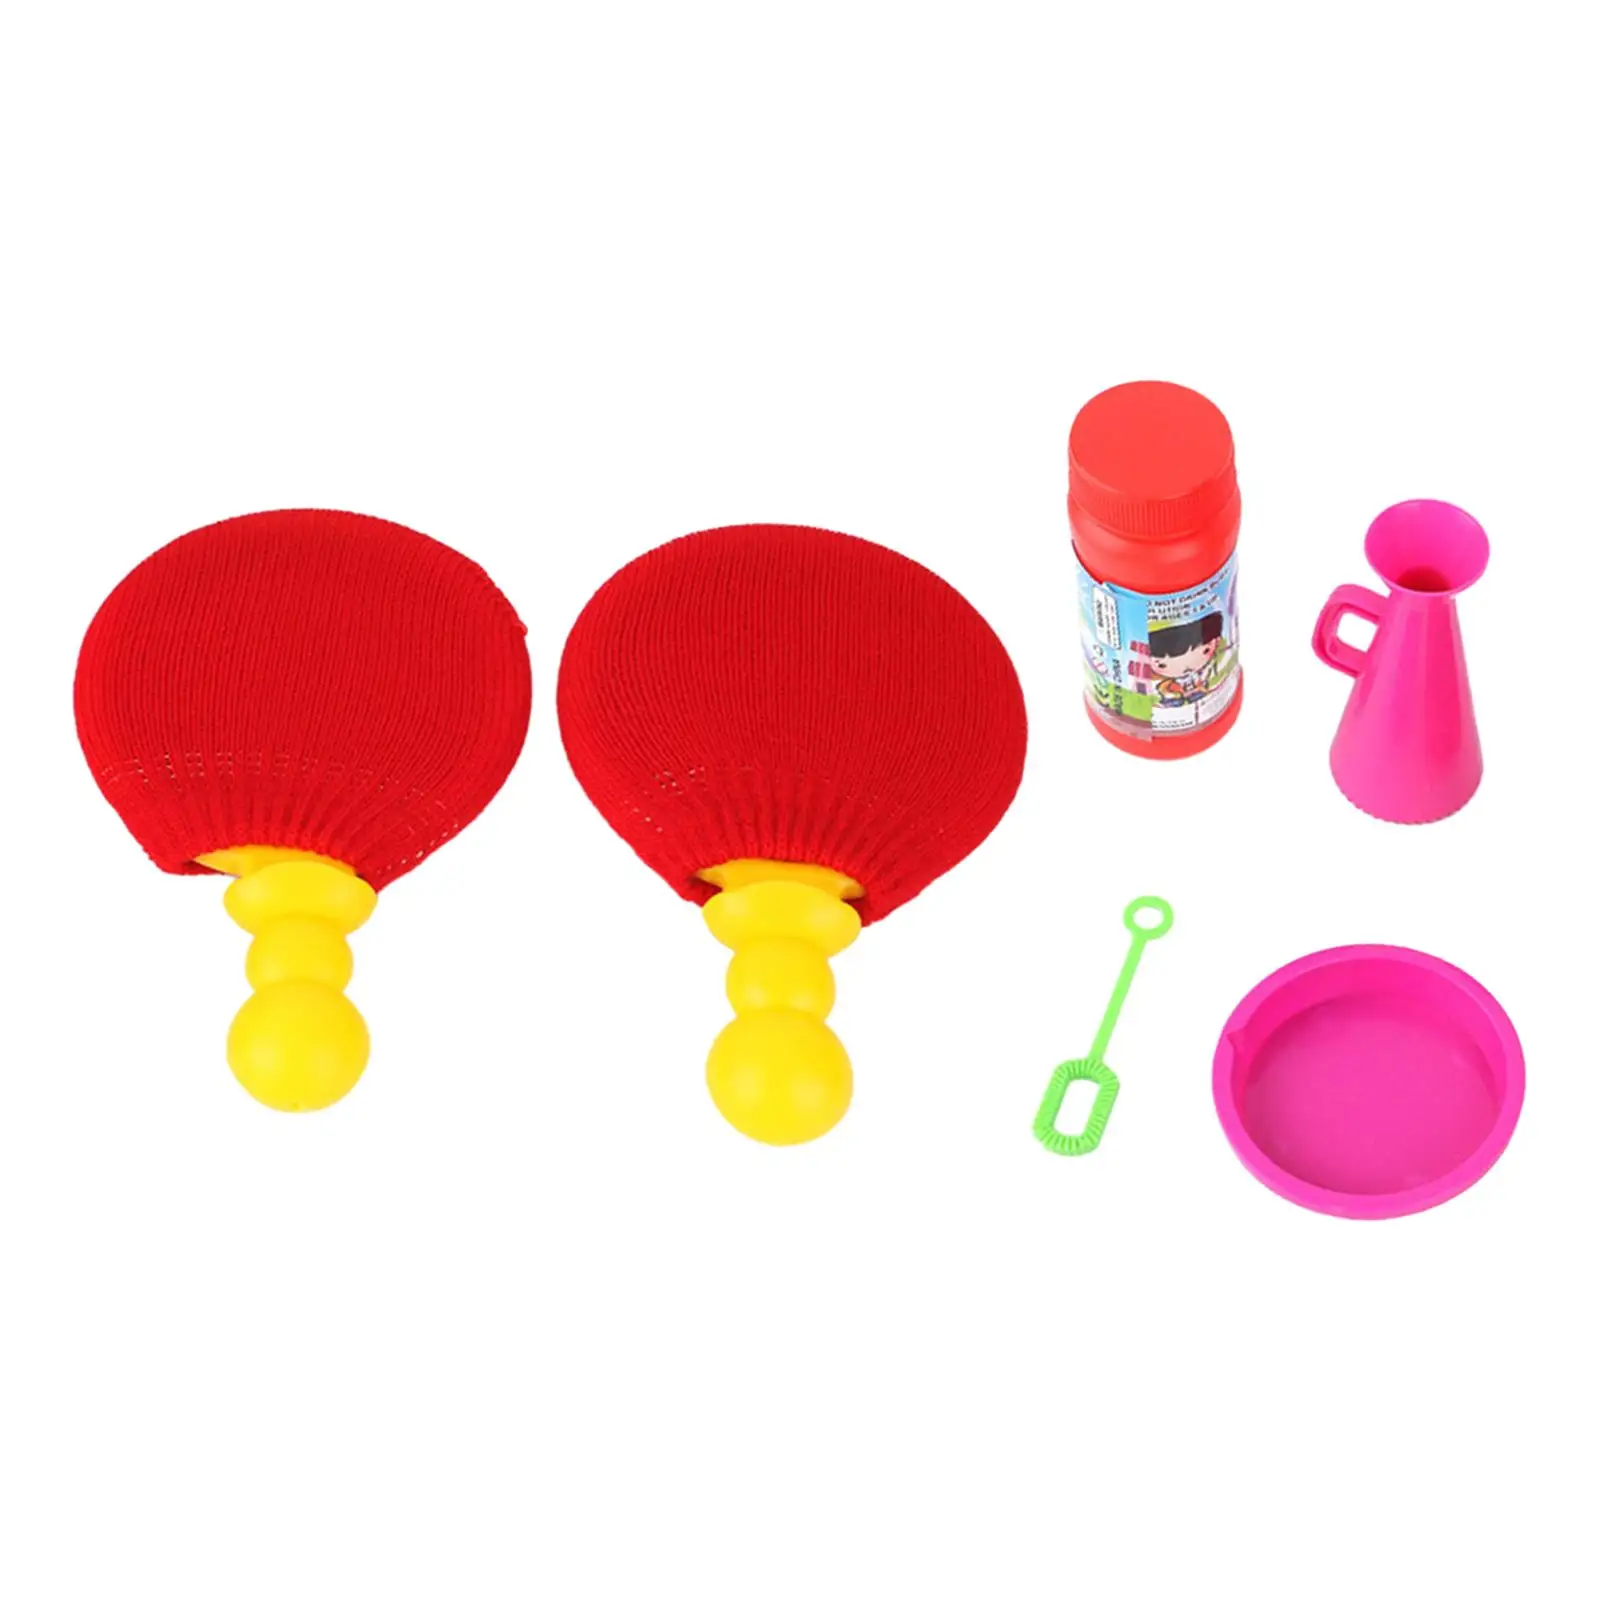 Bubble Maker Set Toys Indoor and Play Ping Pong Game with Soap Bubble for Children Toddlers Kids Girls Boys Great Gift